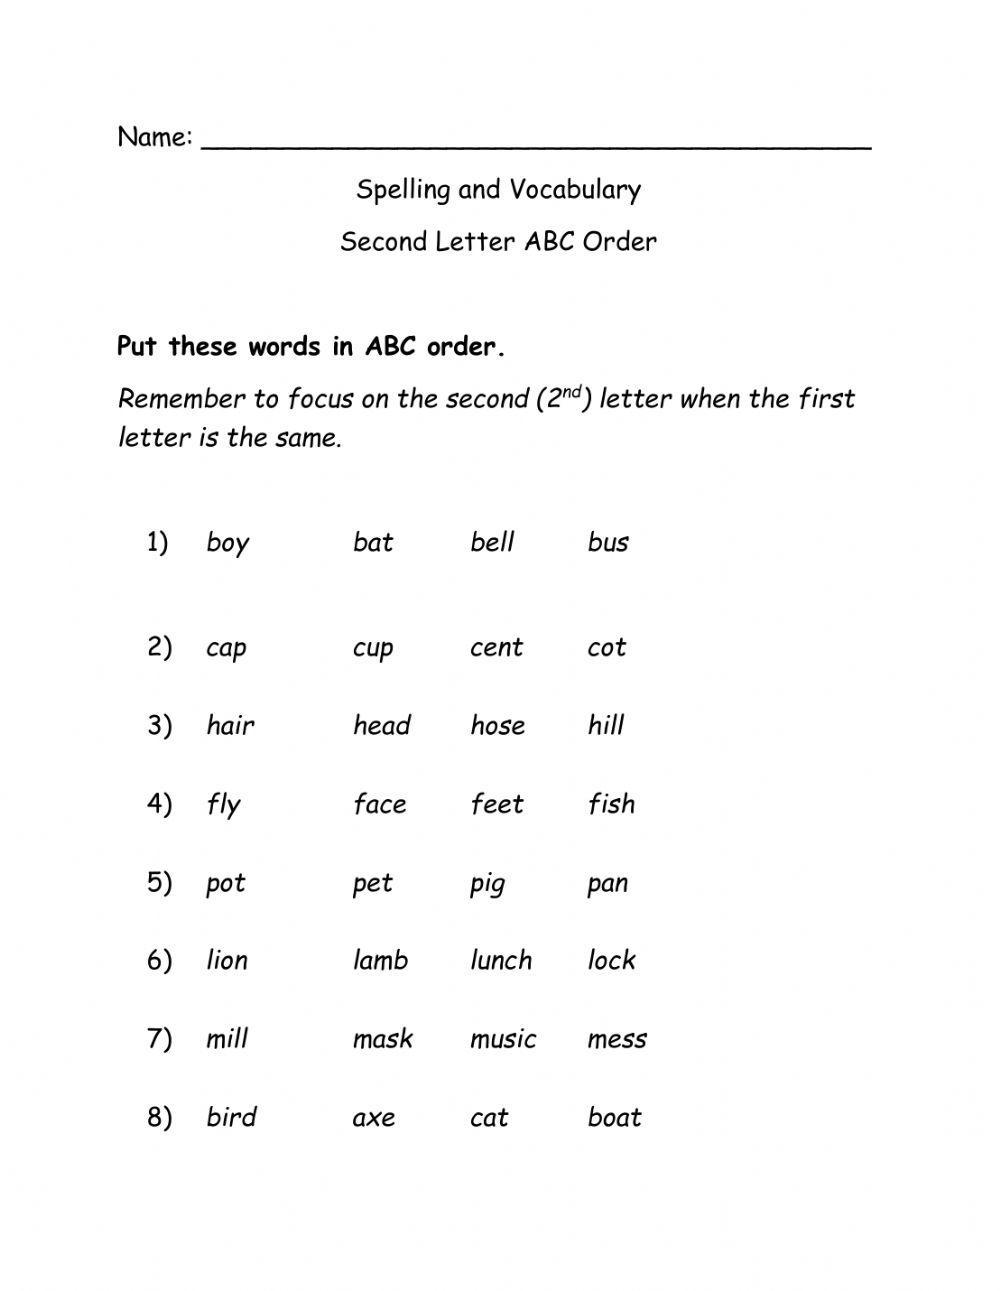 ABC Order 2nd Letter